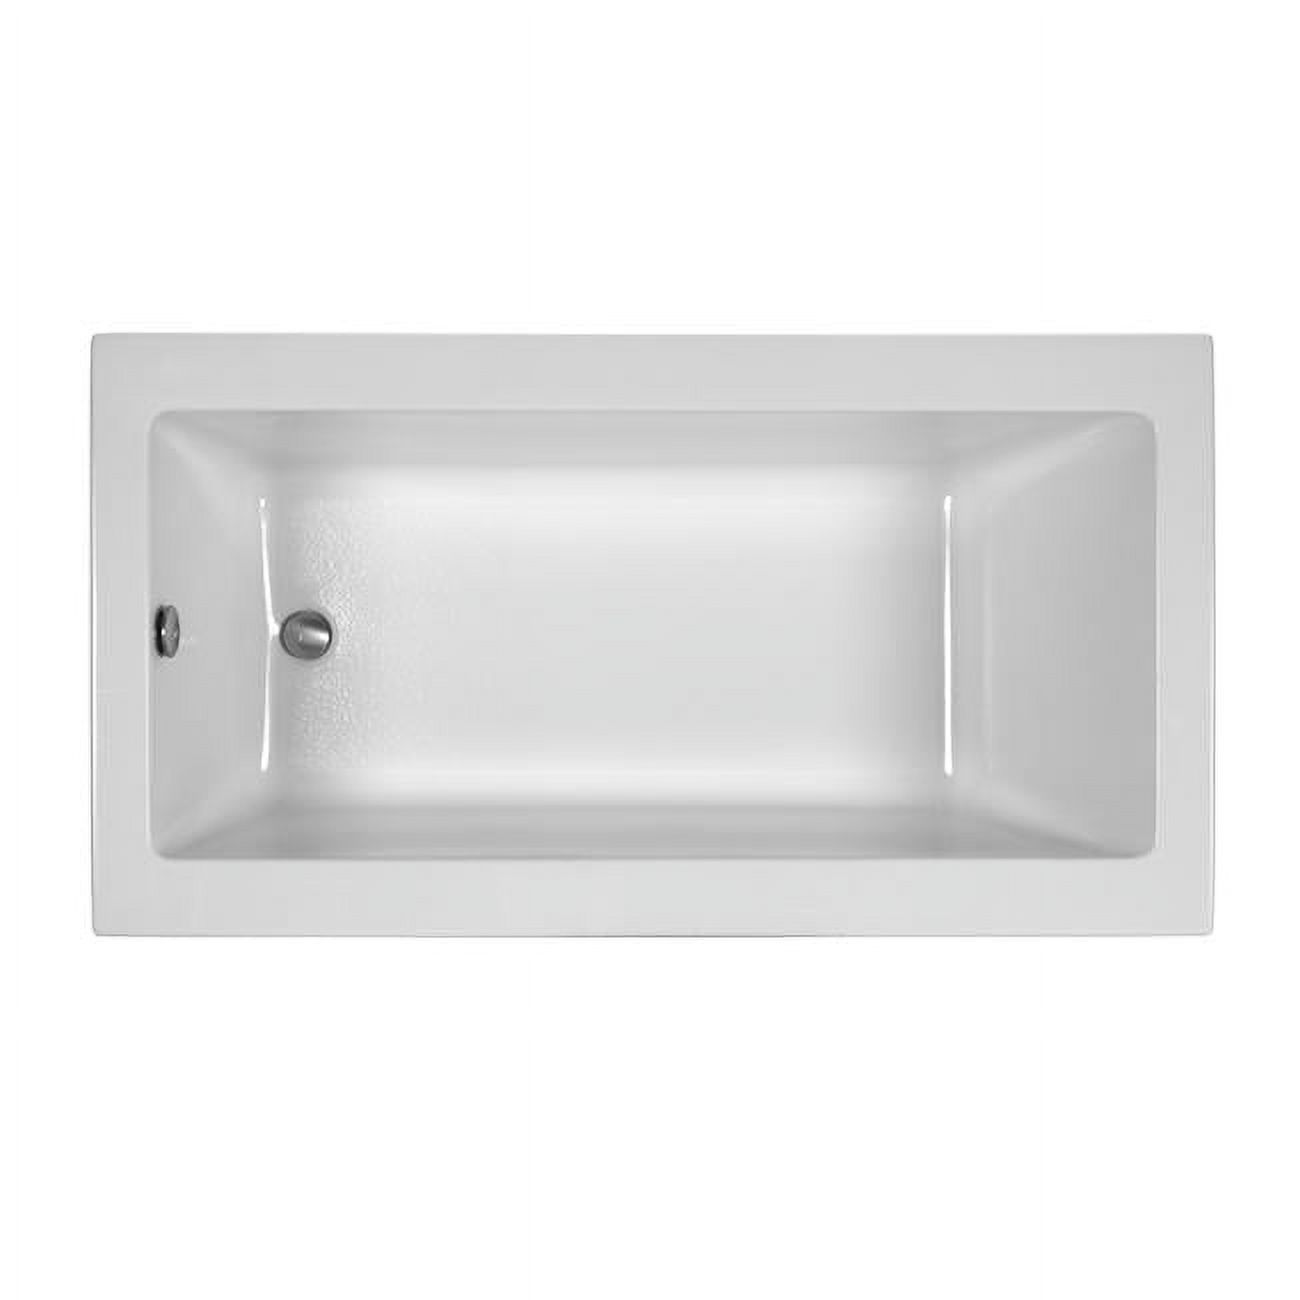 Integral Skirted End Drain Air Bath, Biscuit - 60 x 32 x 19.25 in. - Right Hand - image 1 of 1